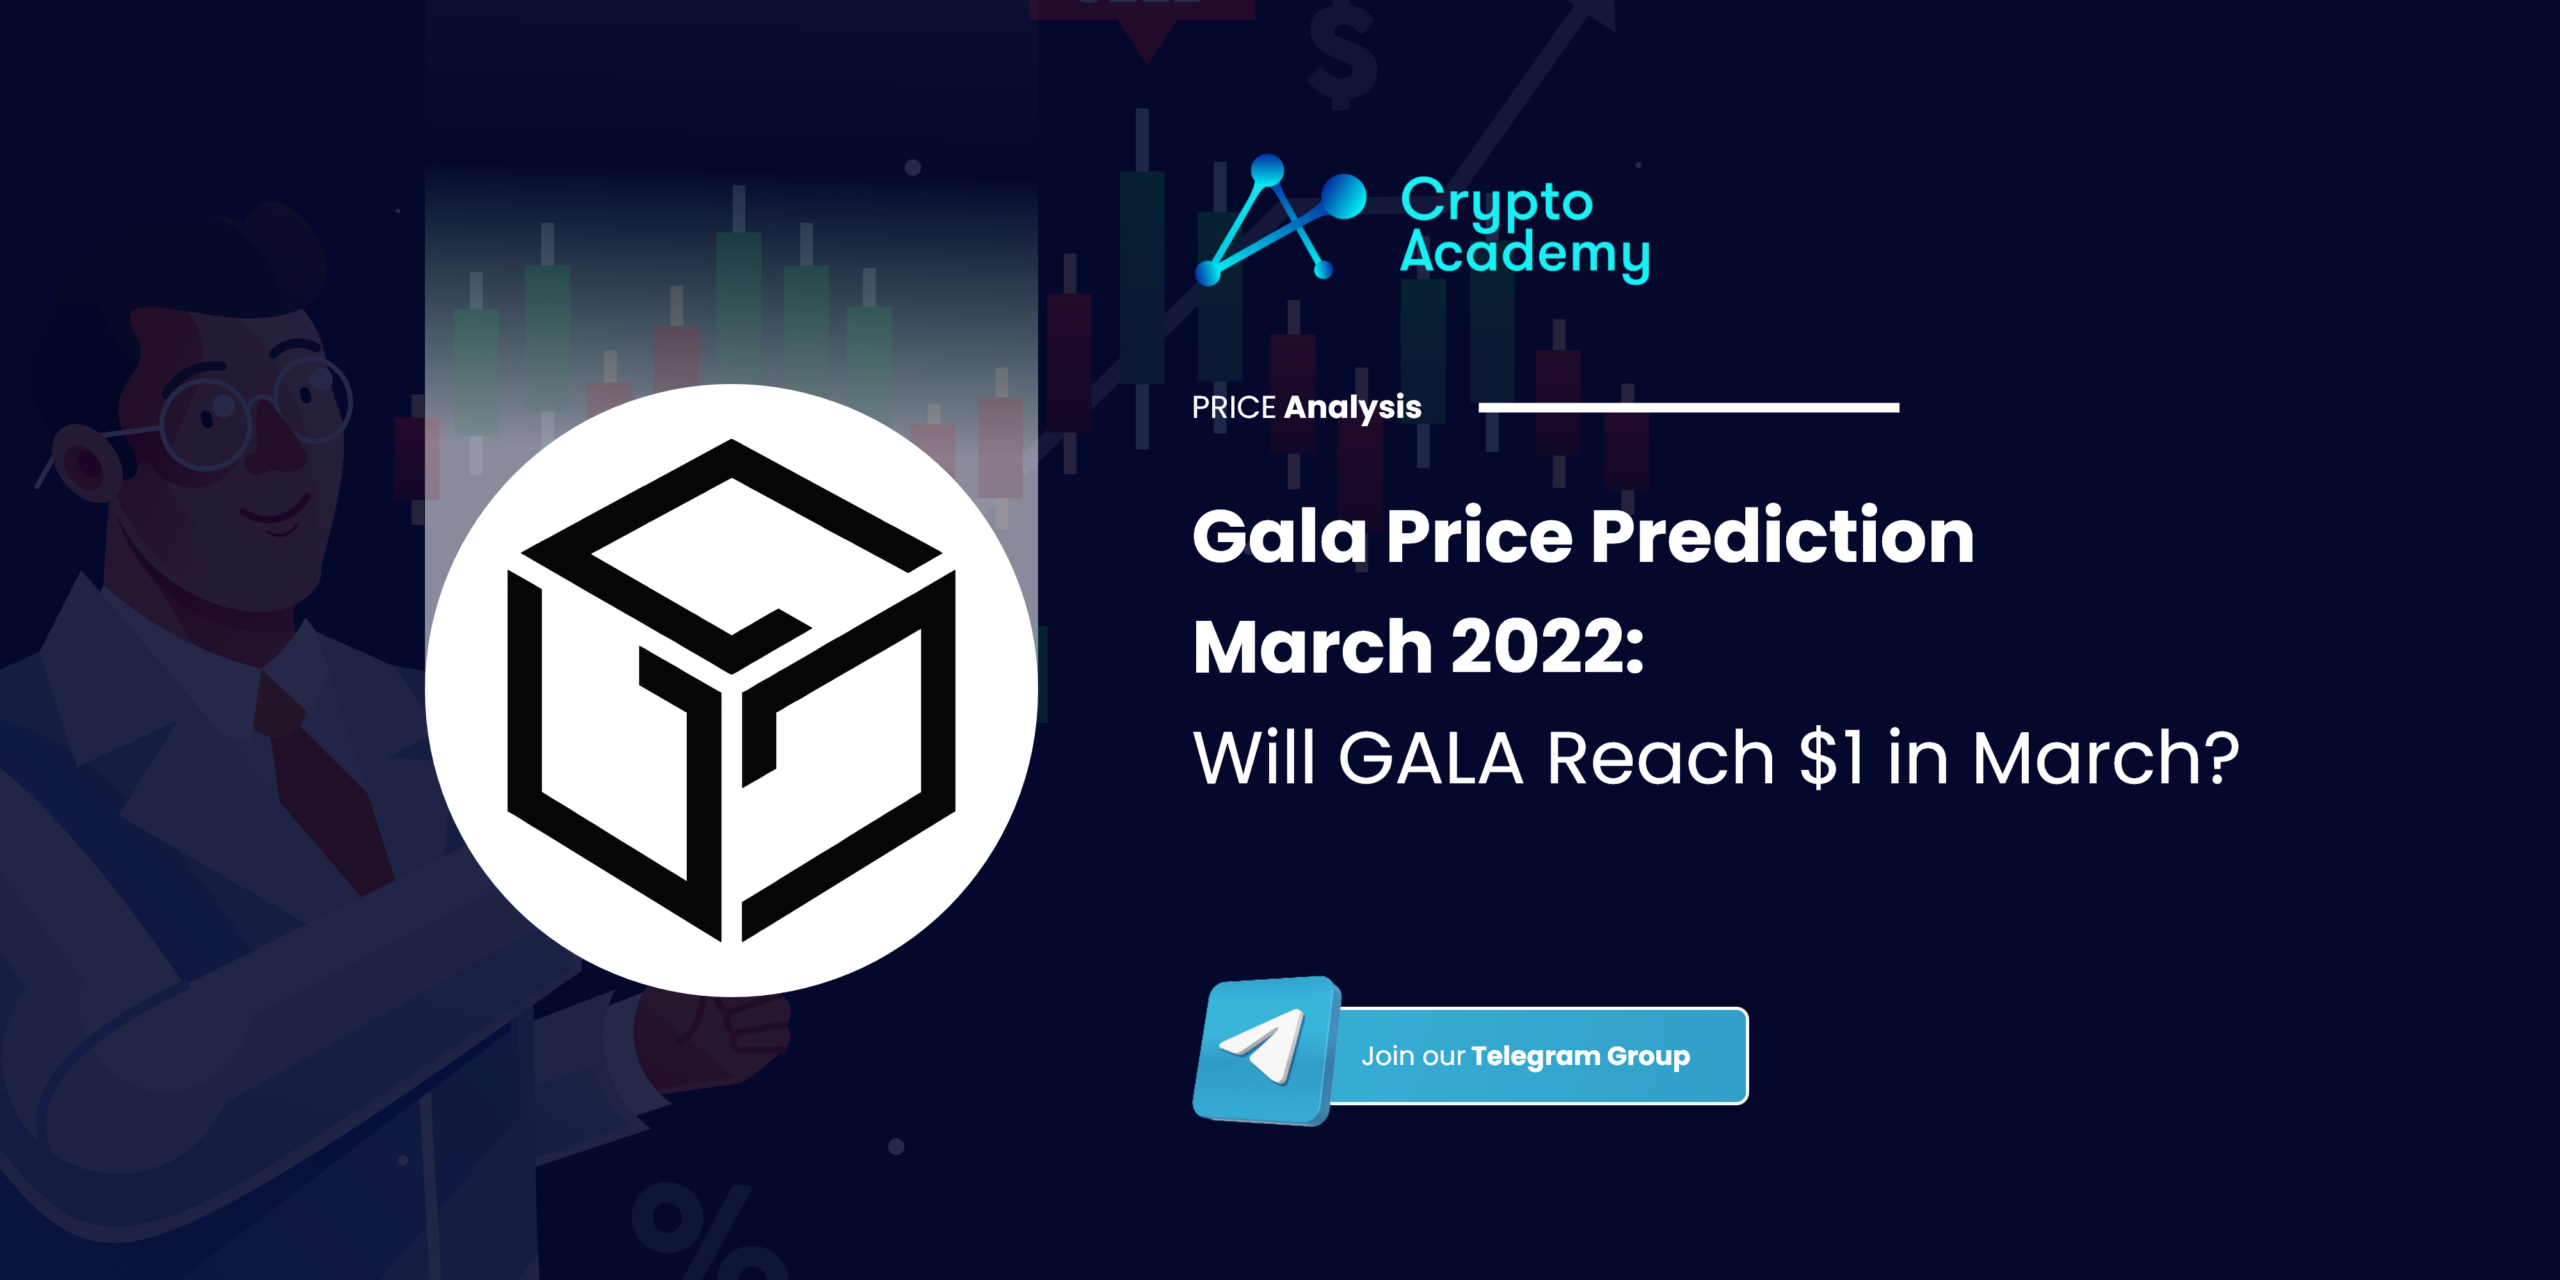 Gala Price Prediction March 2022: Will GALA Reach $1 in March?